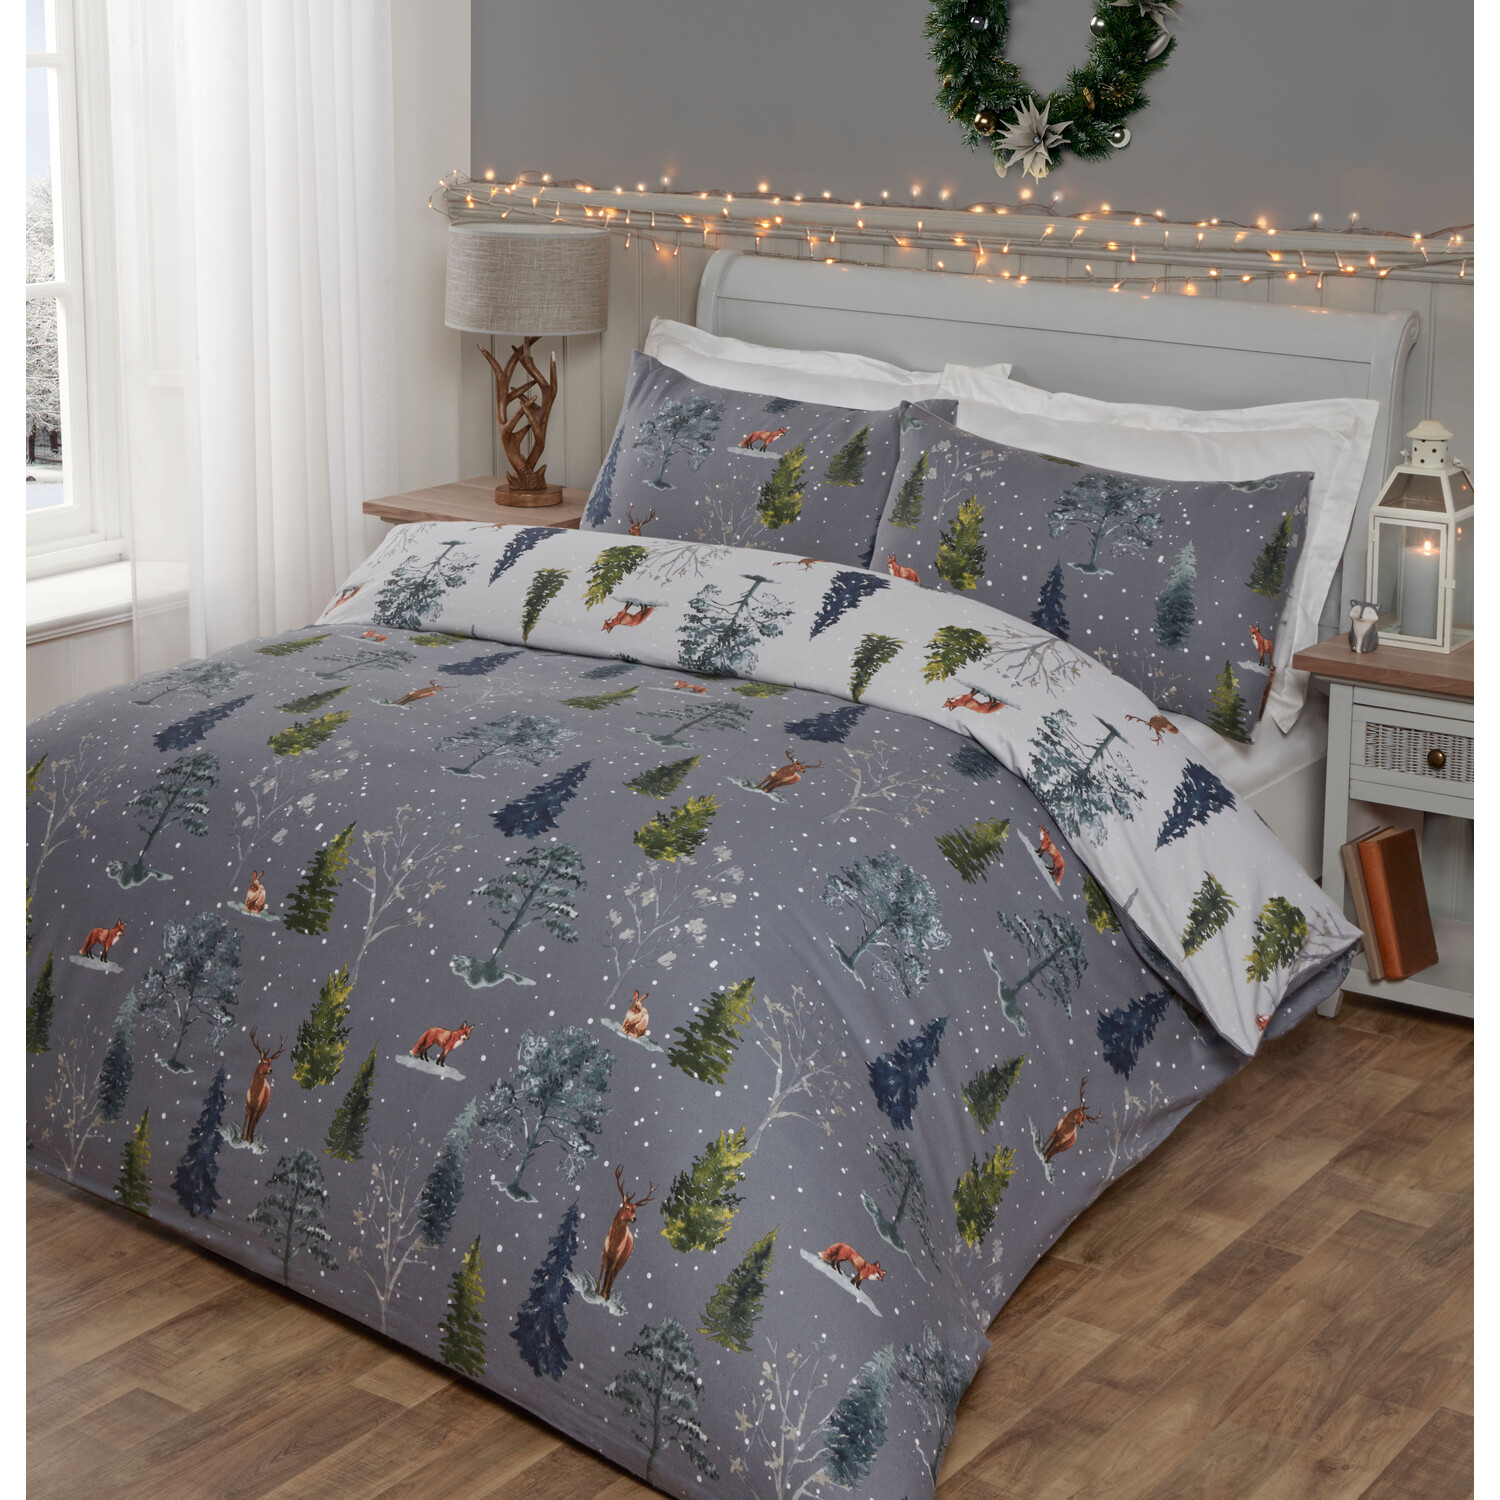 Snowy Forest Duvet Cover and Pillowcase Set - Grey / Superking Image 3